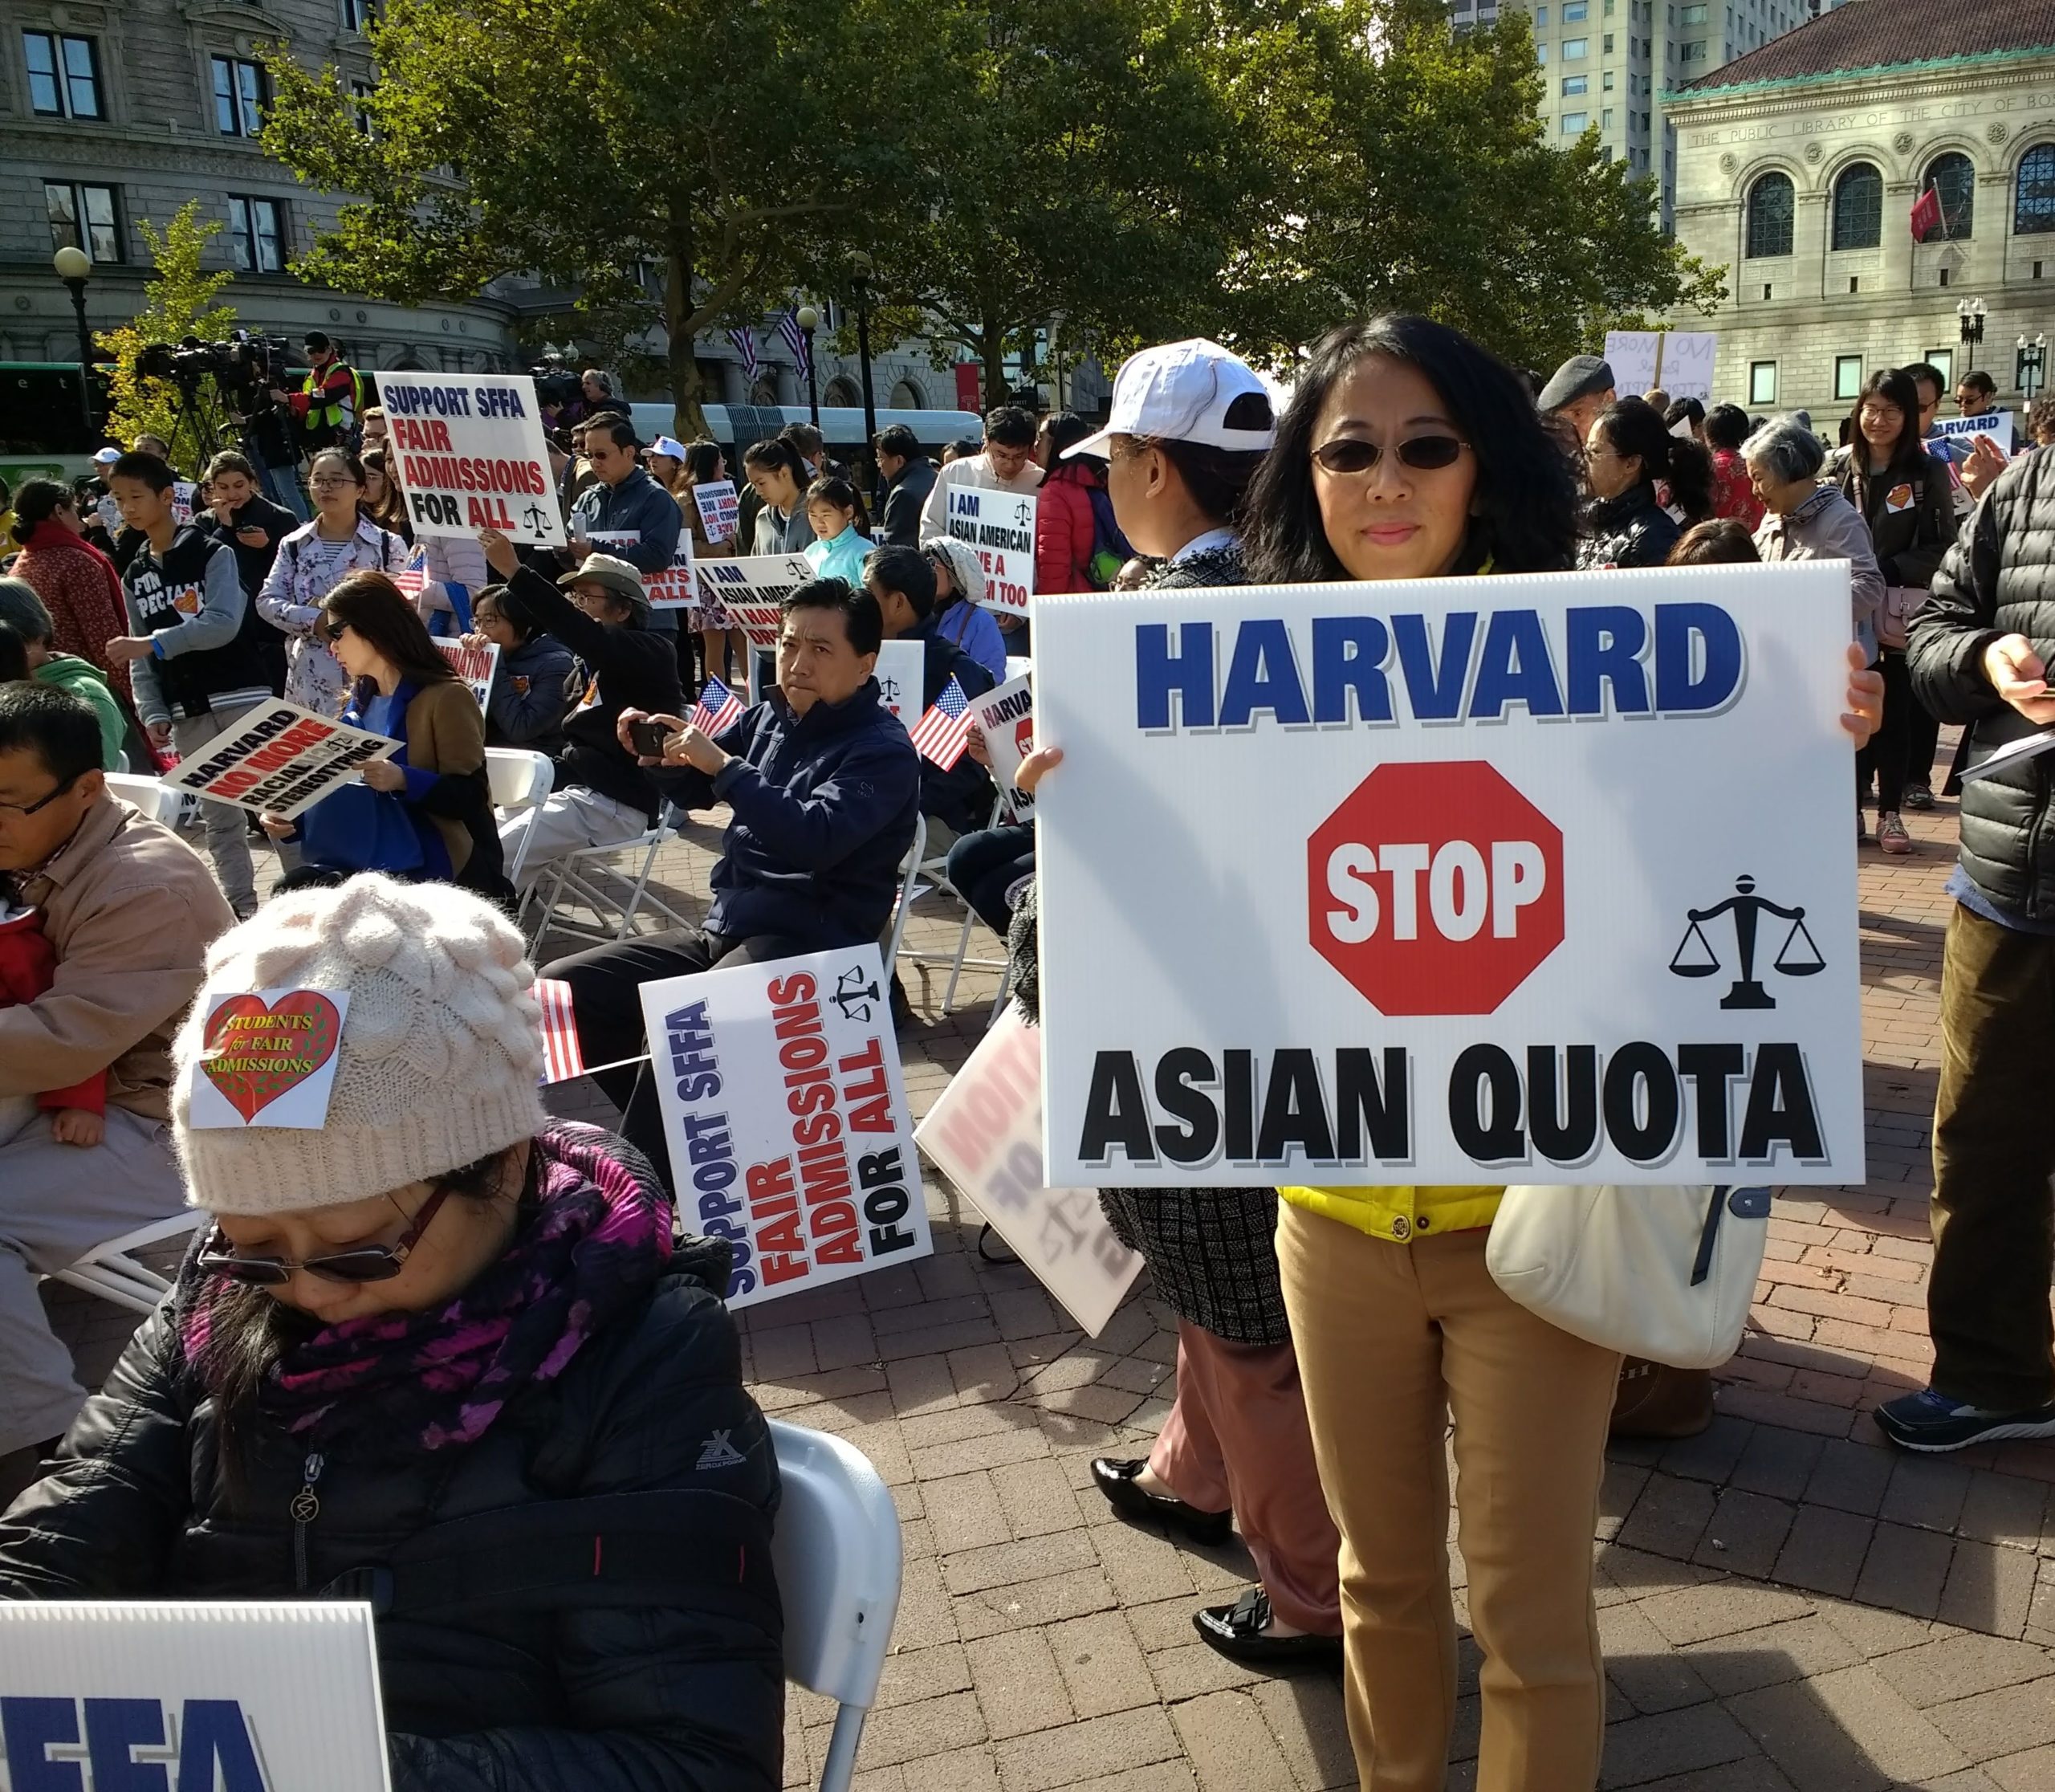 Members of the Support Fair Admissions for All group rally in opposition of affirmative action policies outside the Supreme Court, where judges hear a case arguing that Asian students are not examined under the same provisions as other minority applicants of Harvard University.